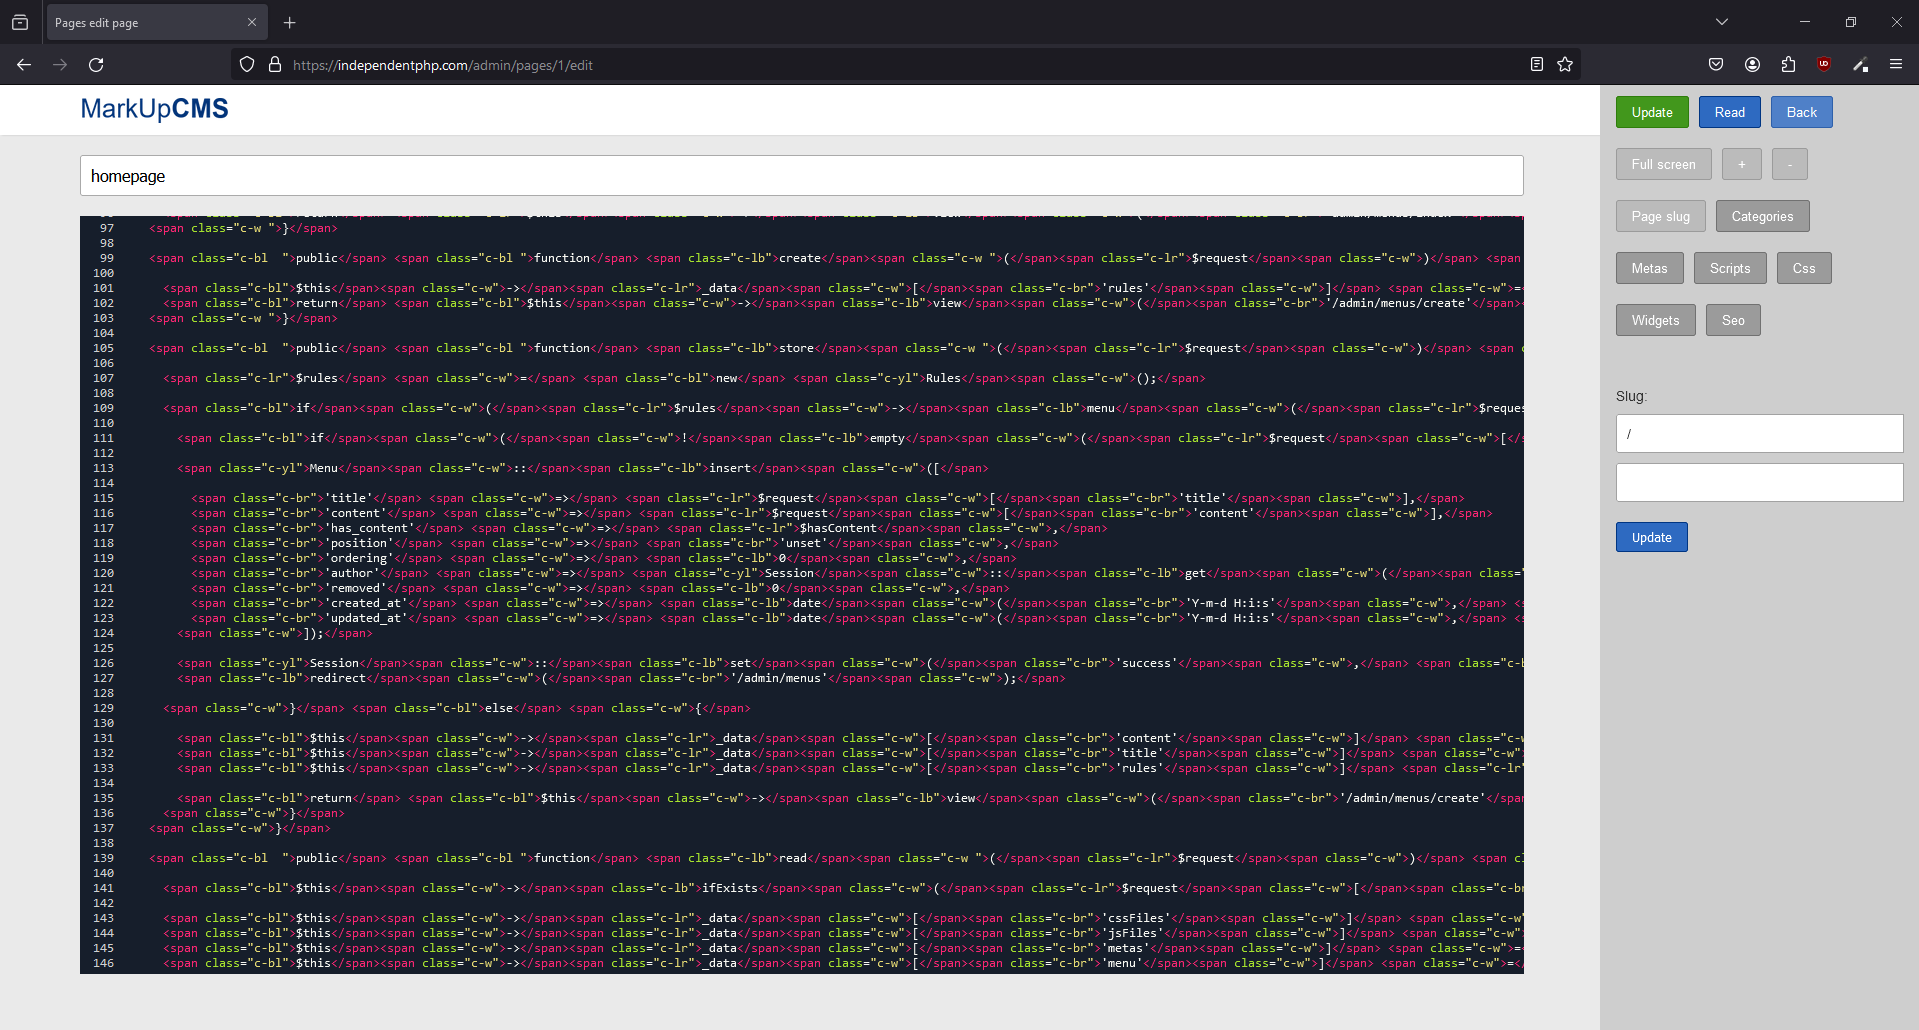 A screenshot of the pages edit page where the slug section is opened in MarkUpCMS